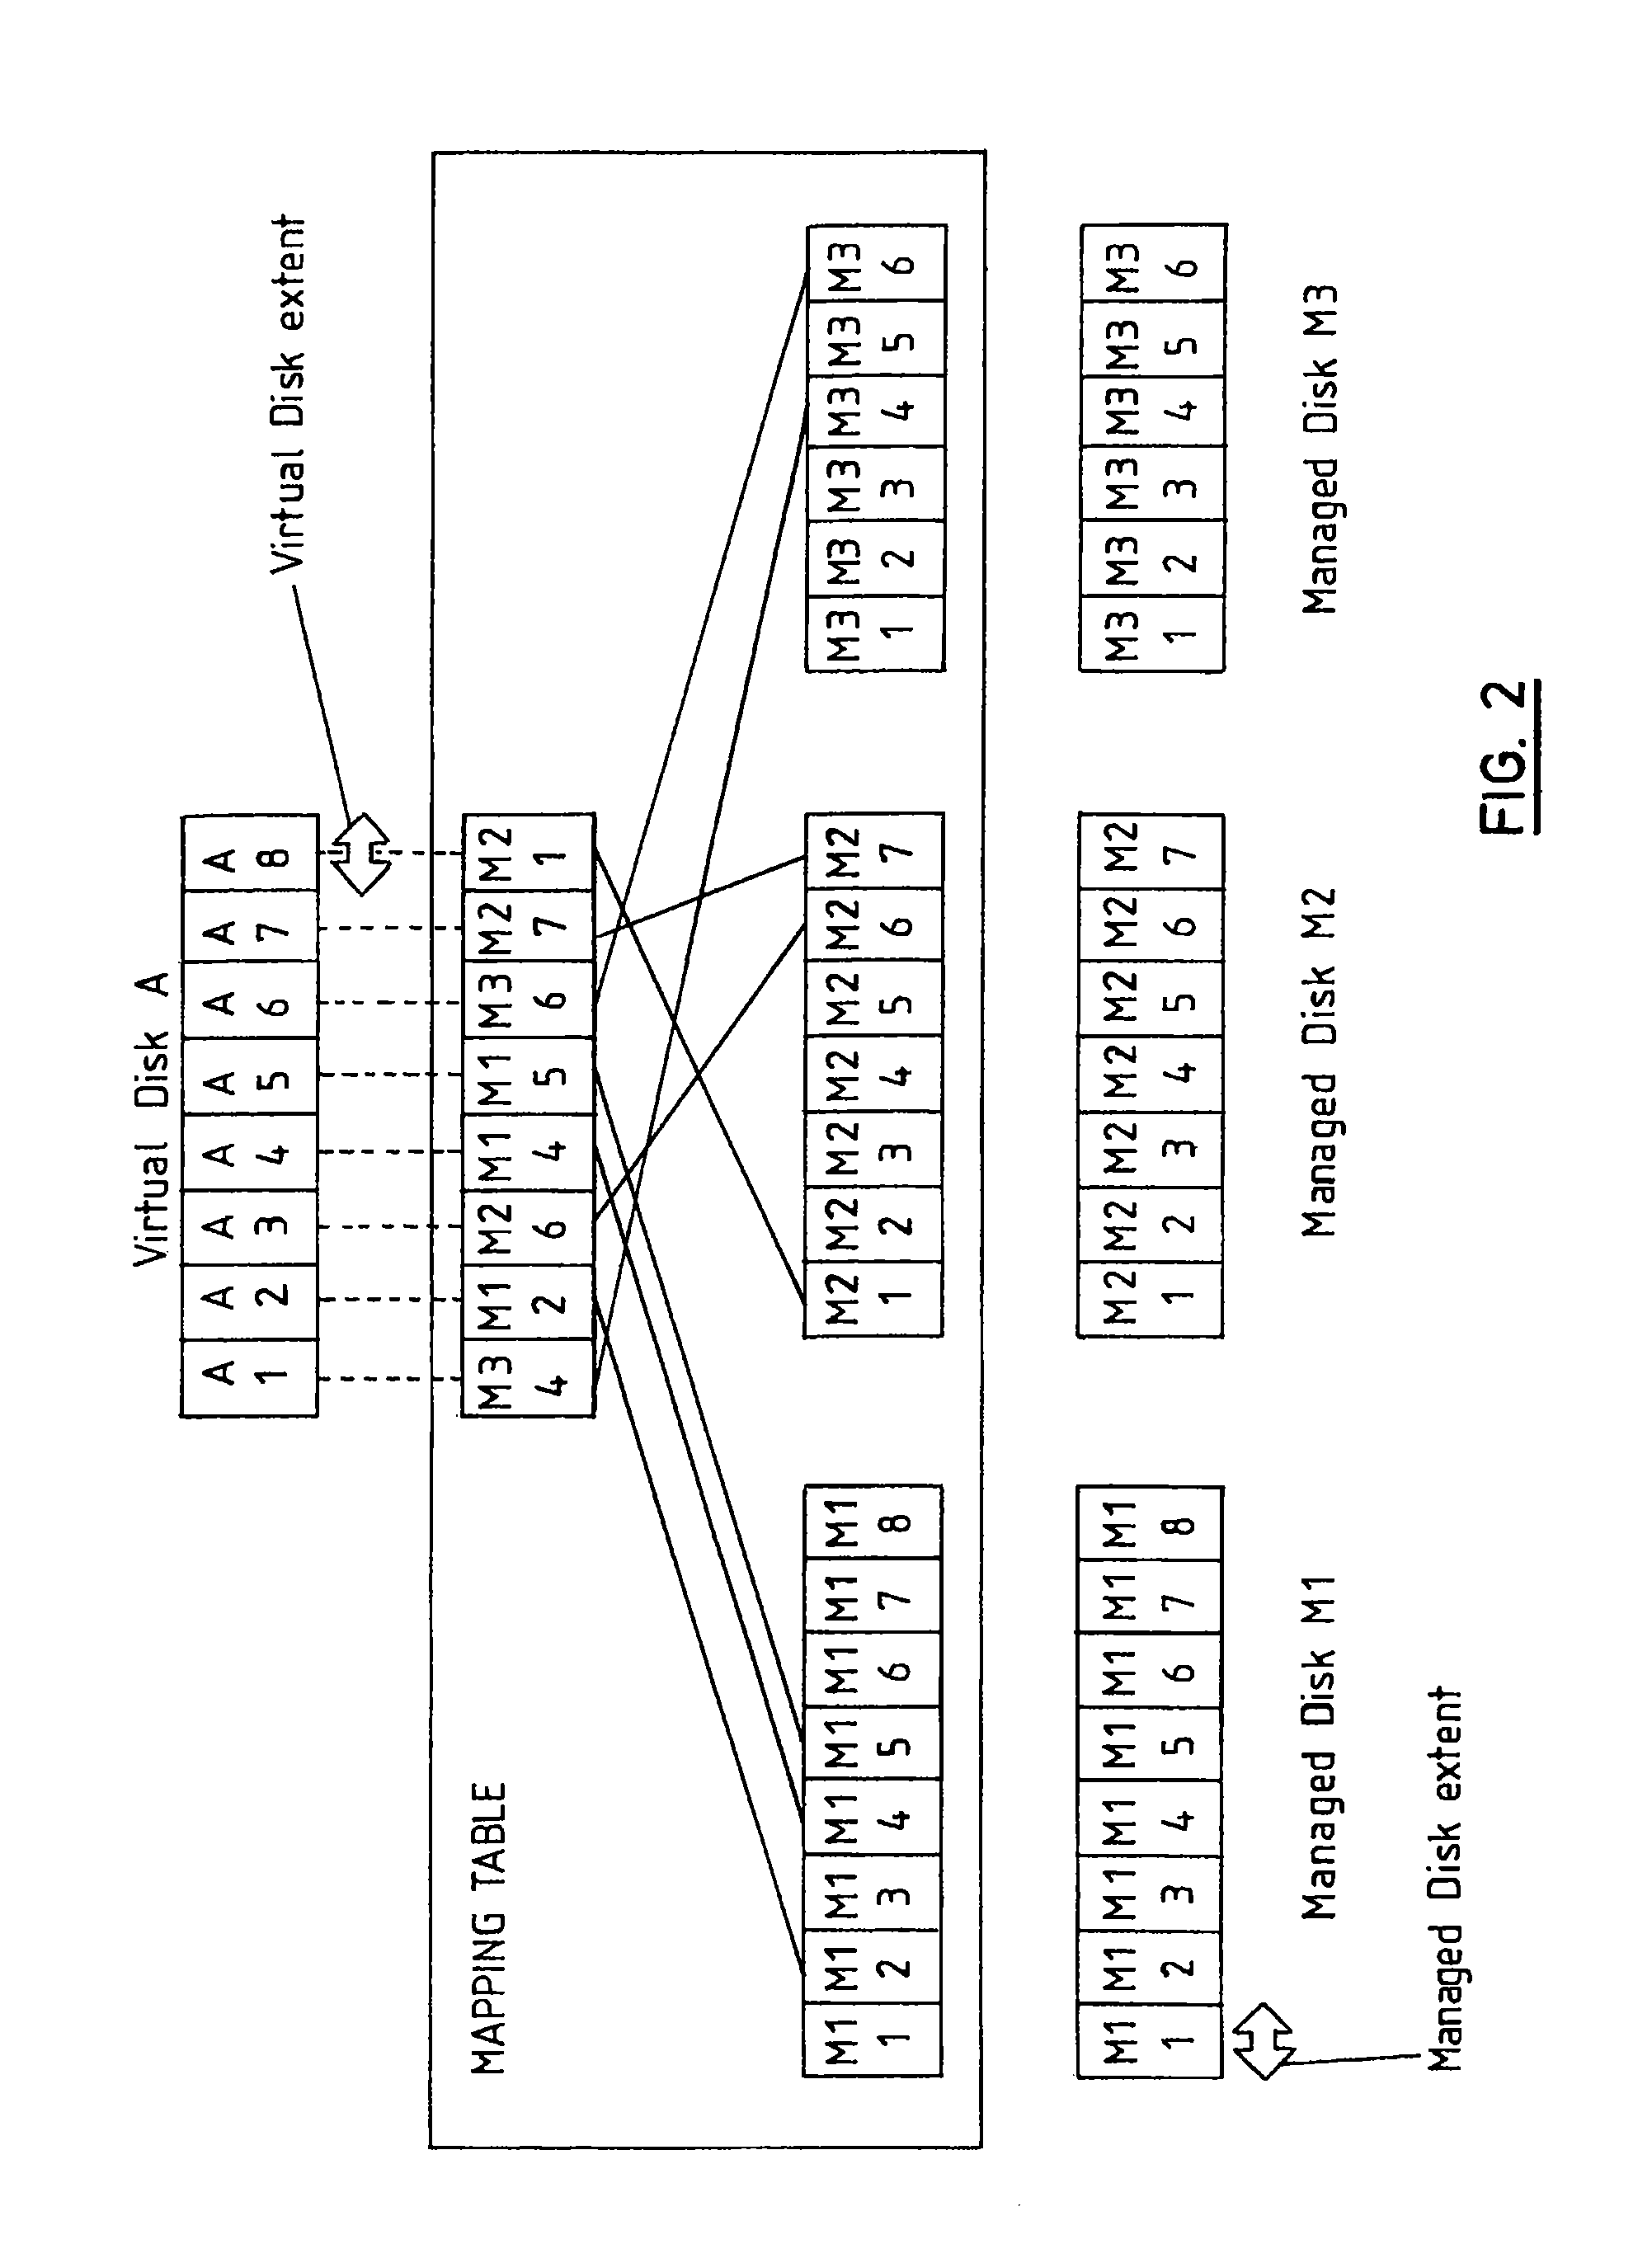 Method, system and computer program product for managing the storage of data